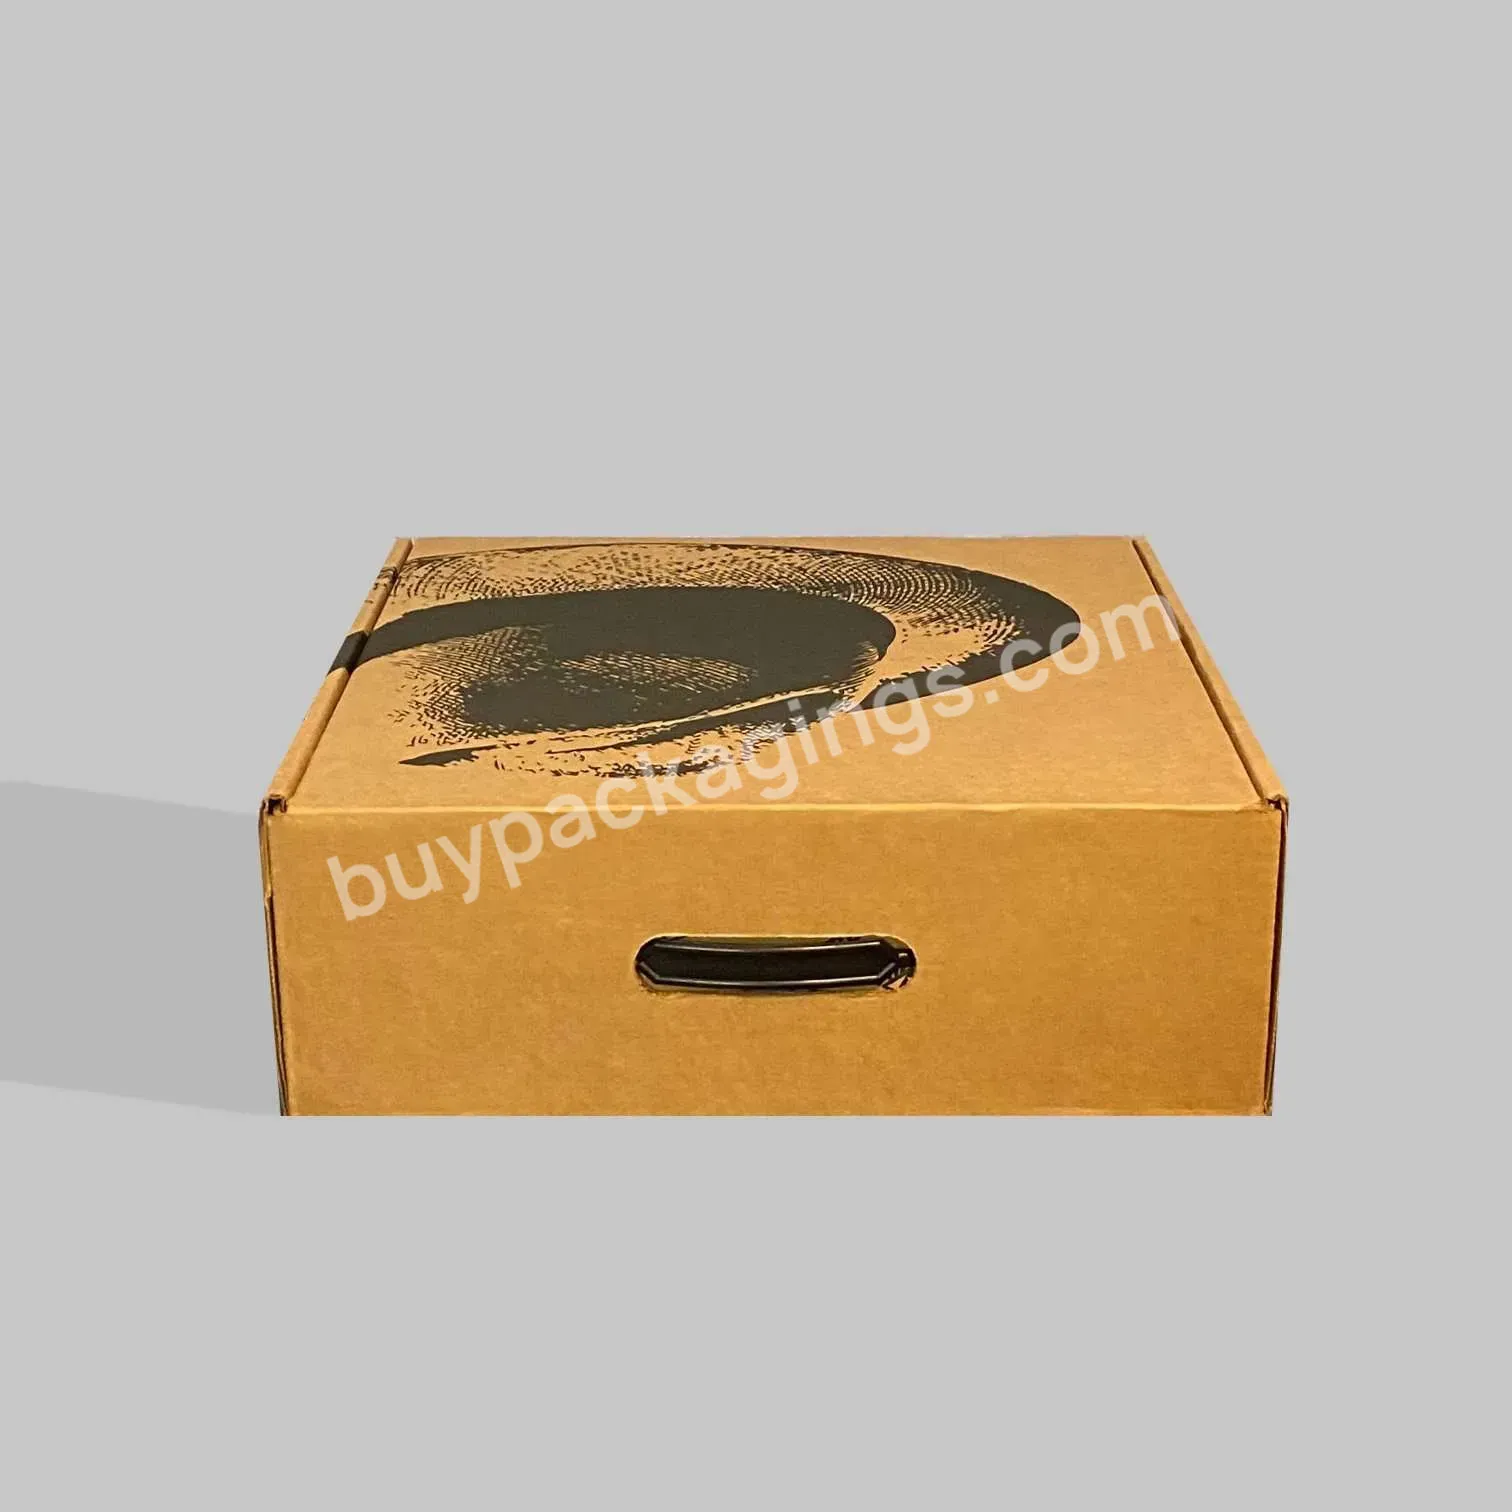 Hot Sale Popular Clothes Packaging Custom Design Ferora Hats Packing Boxes - Buy Hat Boxes,Hat Box Packaging,Fedora Hat Boxes.